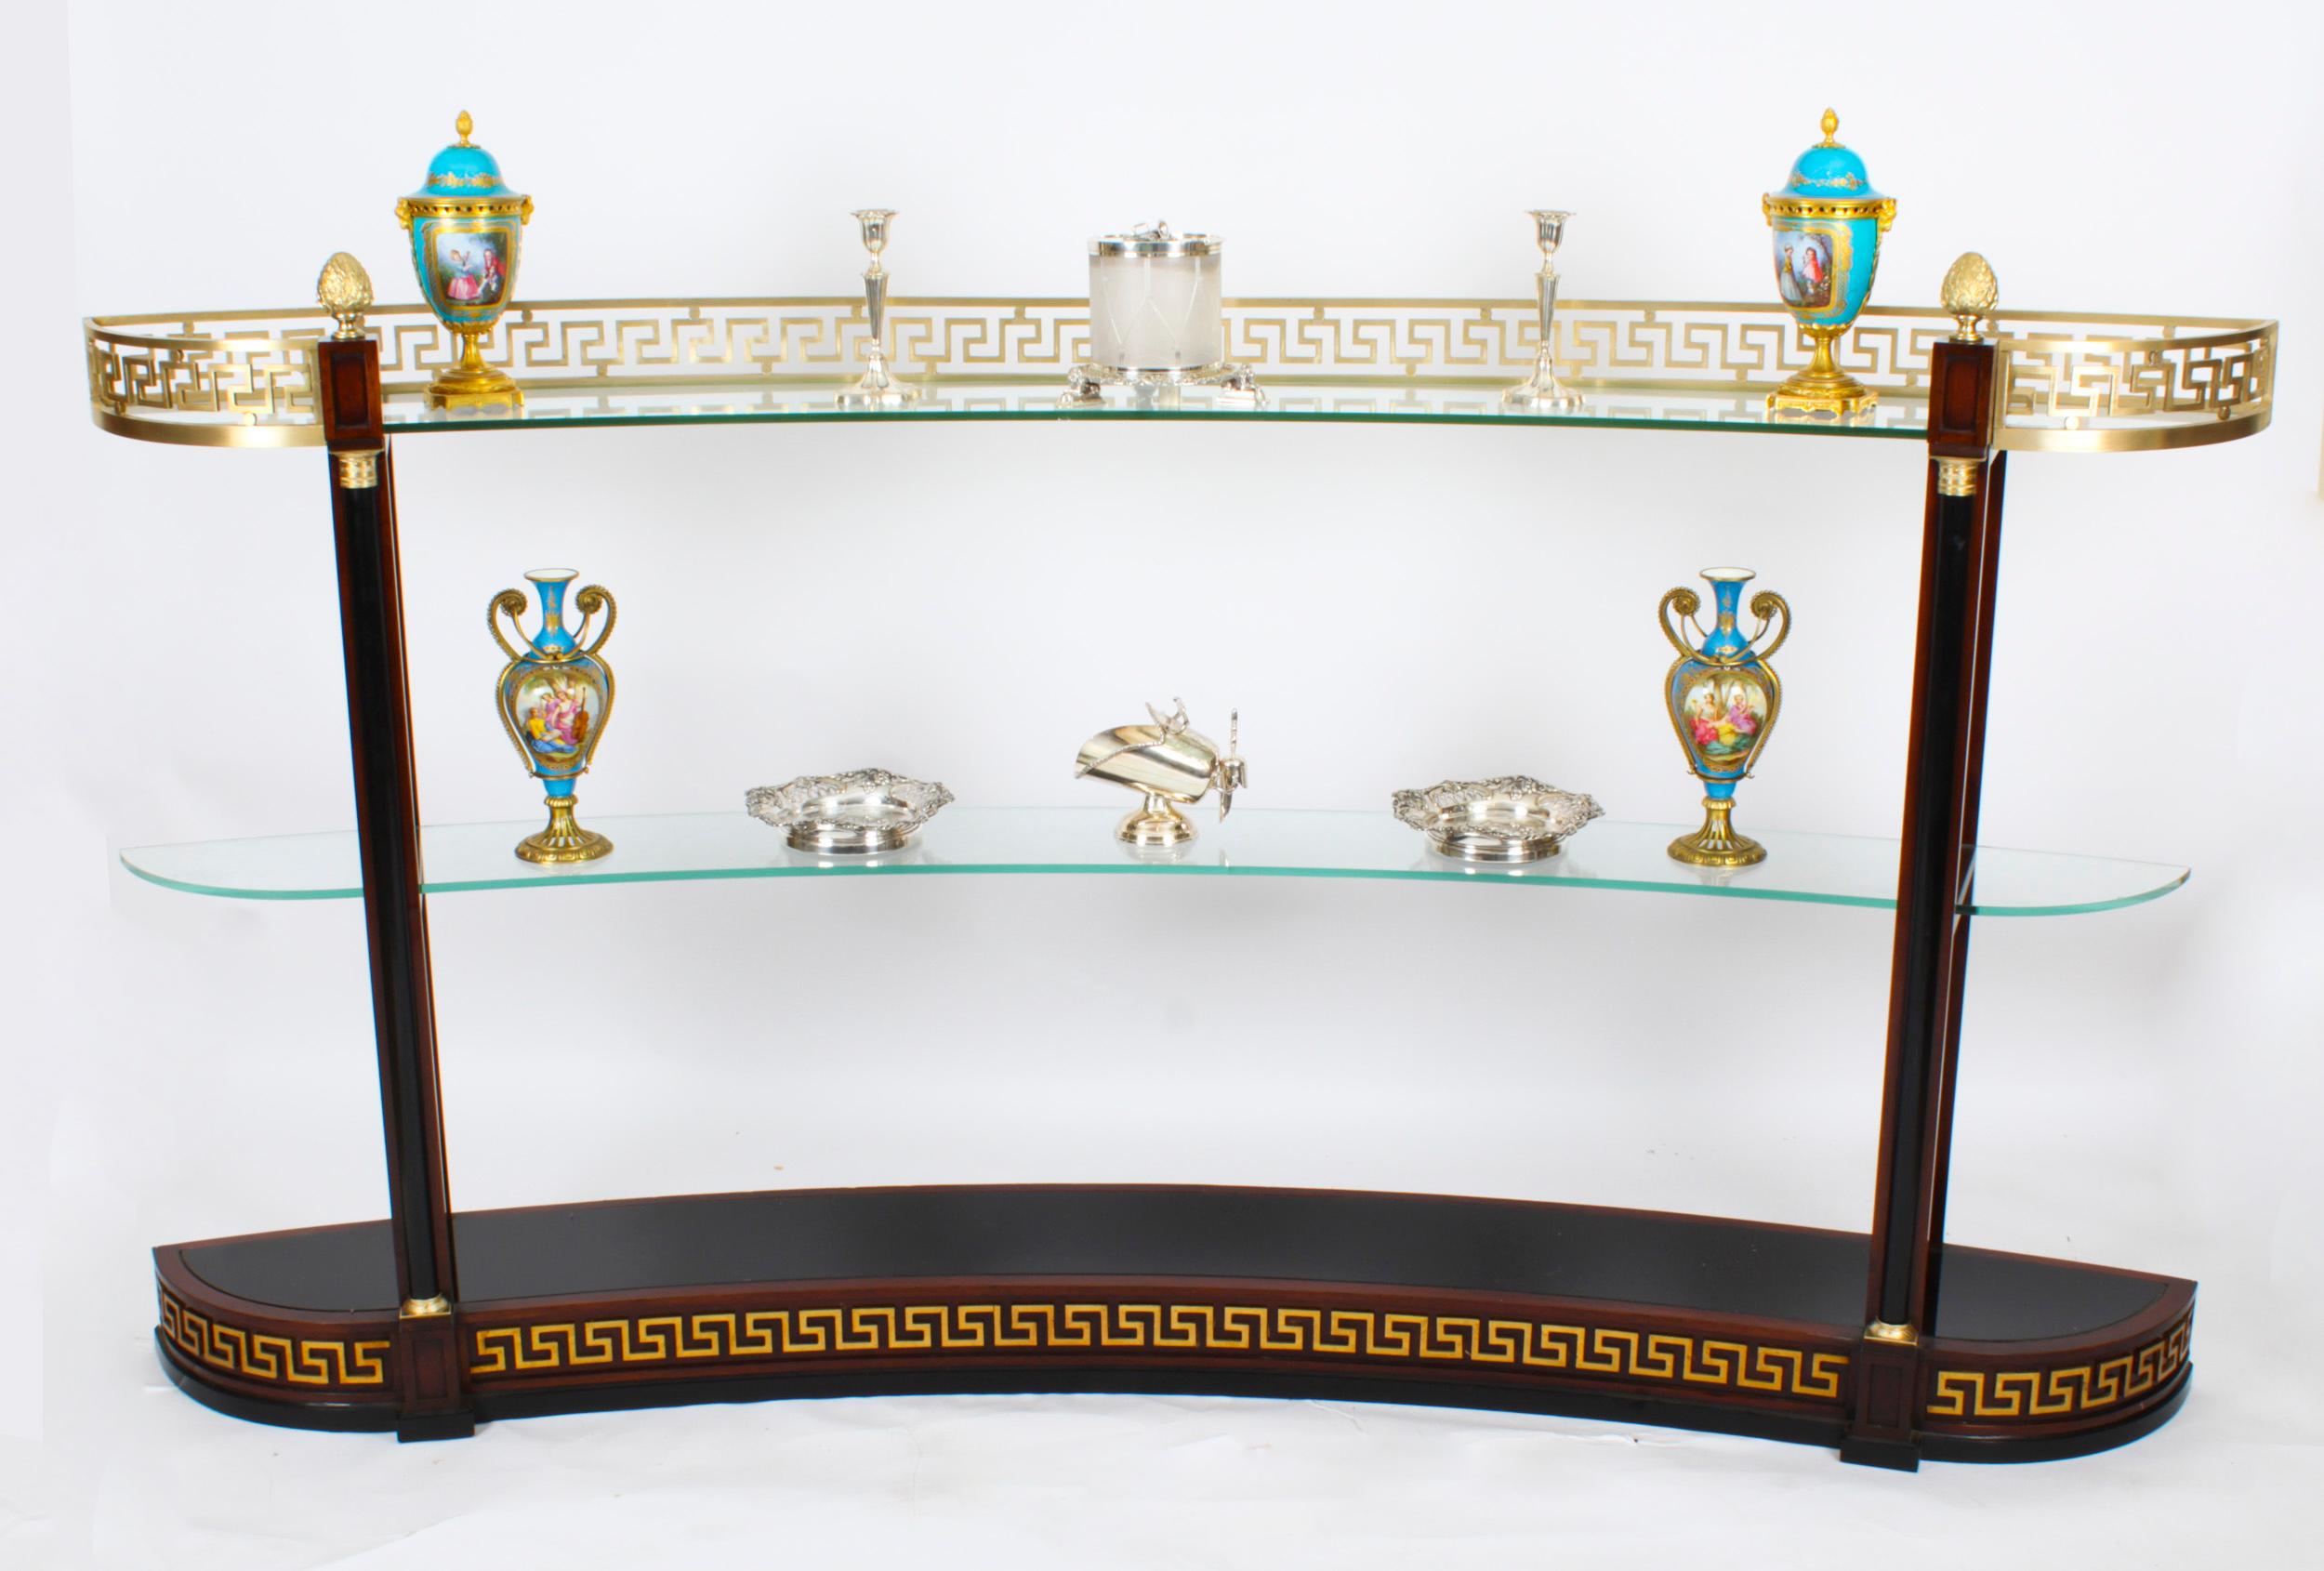 This is a magnificent vintage walnut and ormolu mounted Versace curved glass display unit, circa 1990's in date. 

This free-standing unit features a Greek key ormolu gallery over two open shaped glass shelves, the walnut frame with black lacquer